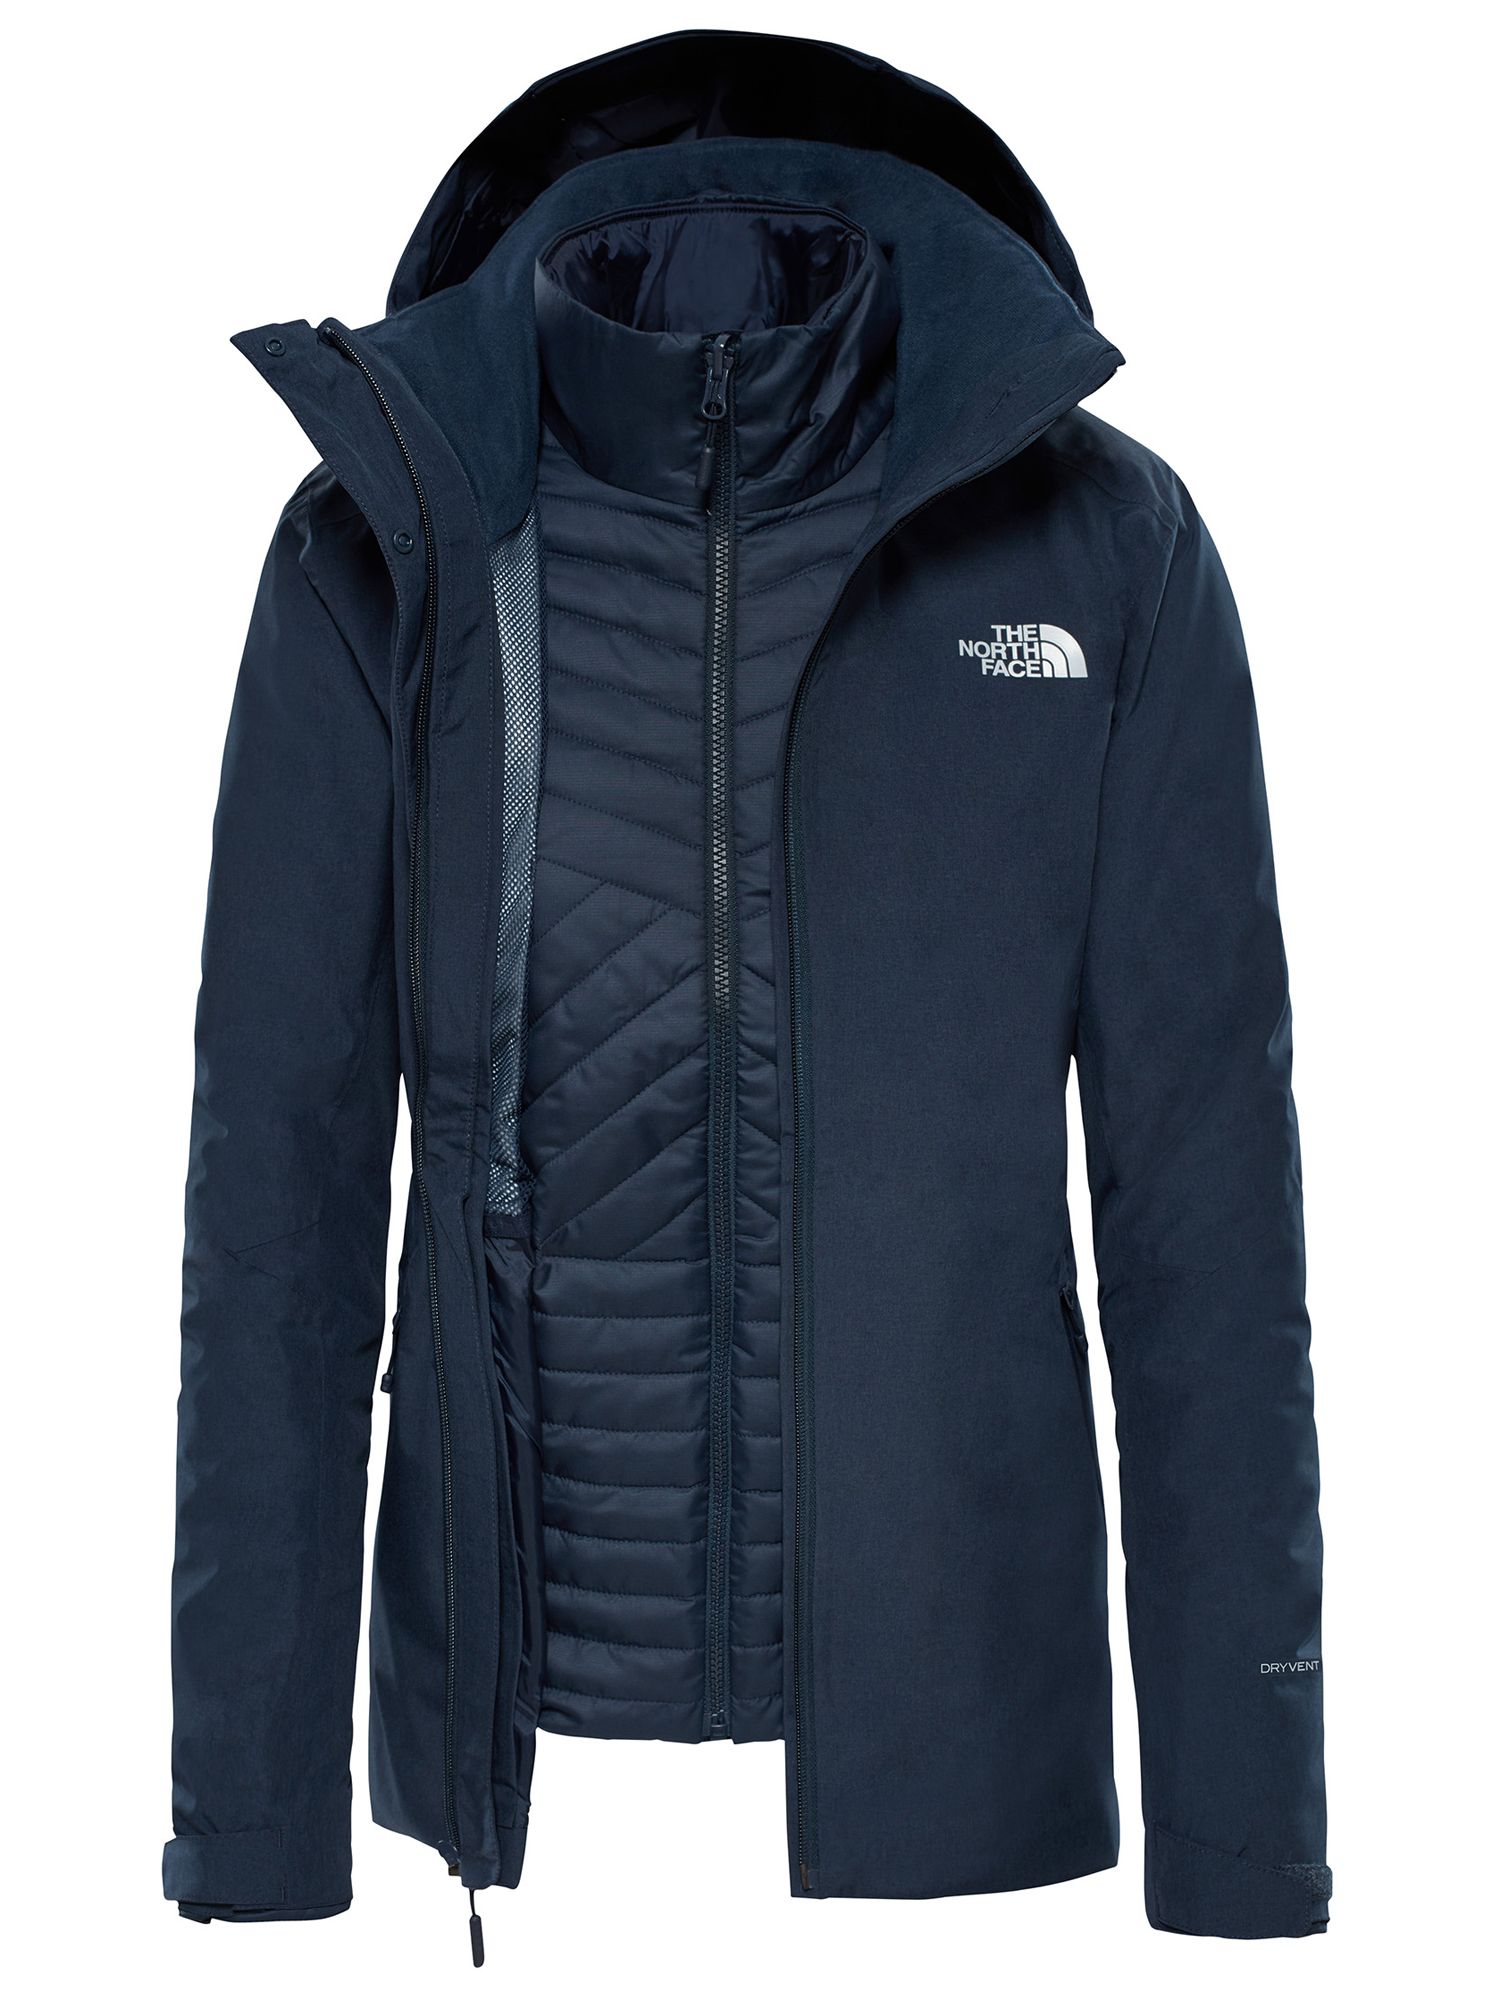 the north face inlux triclimate women's waterproof jacket